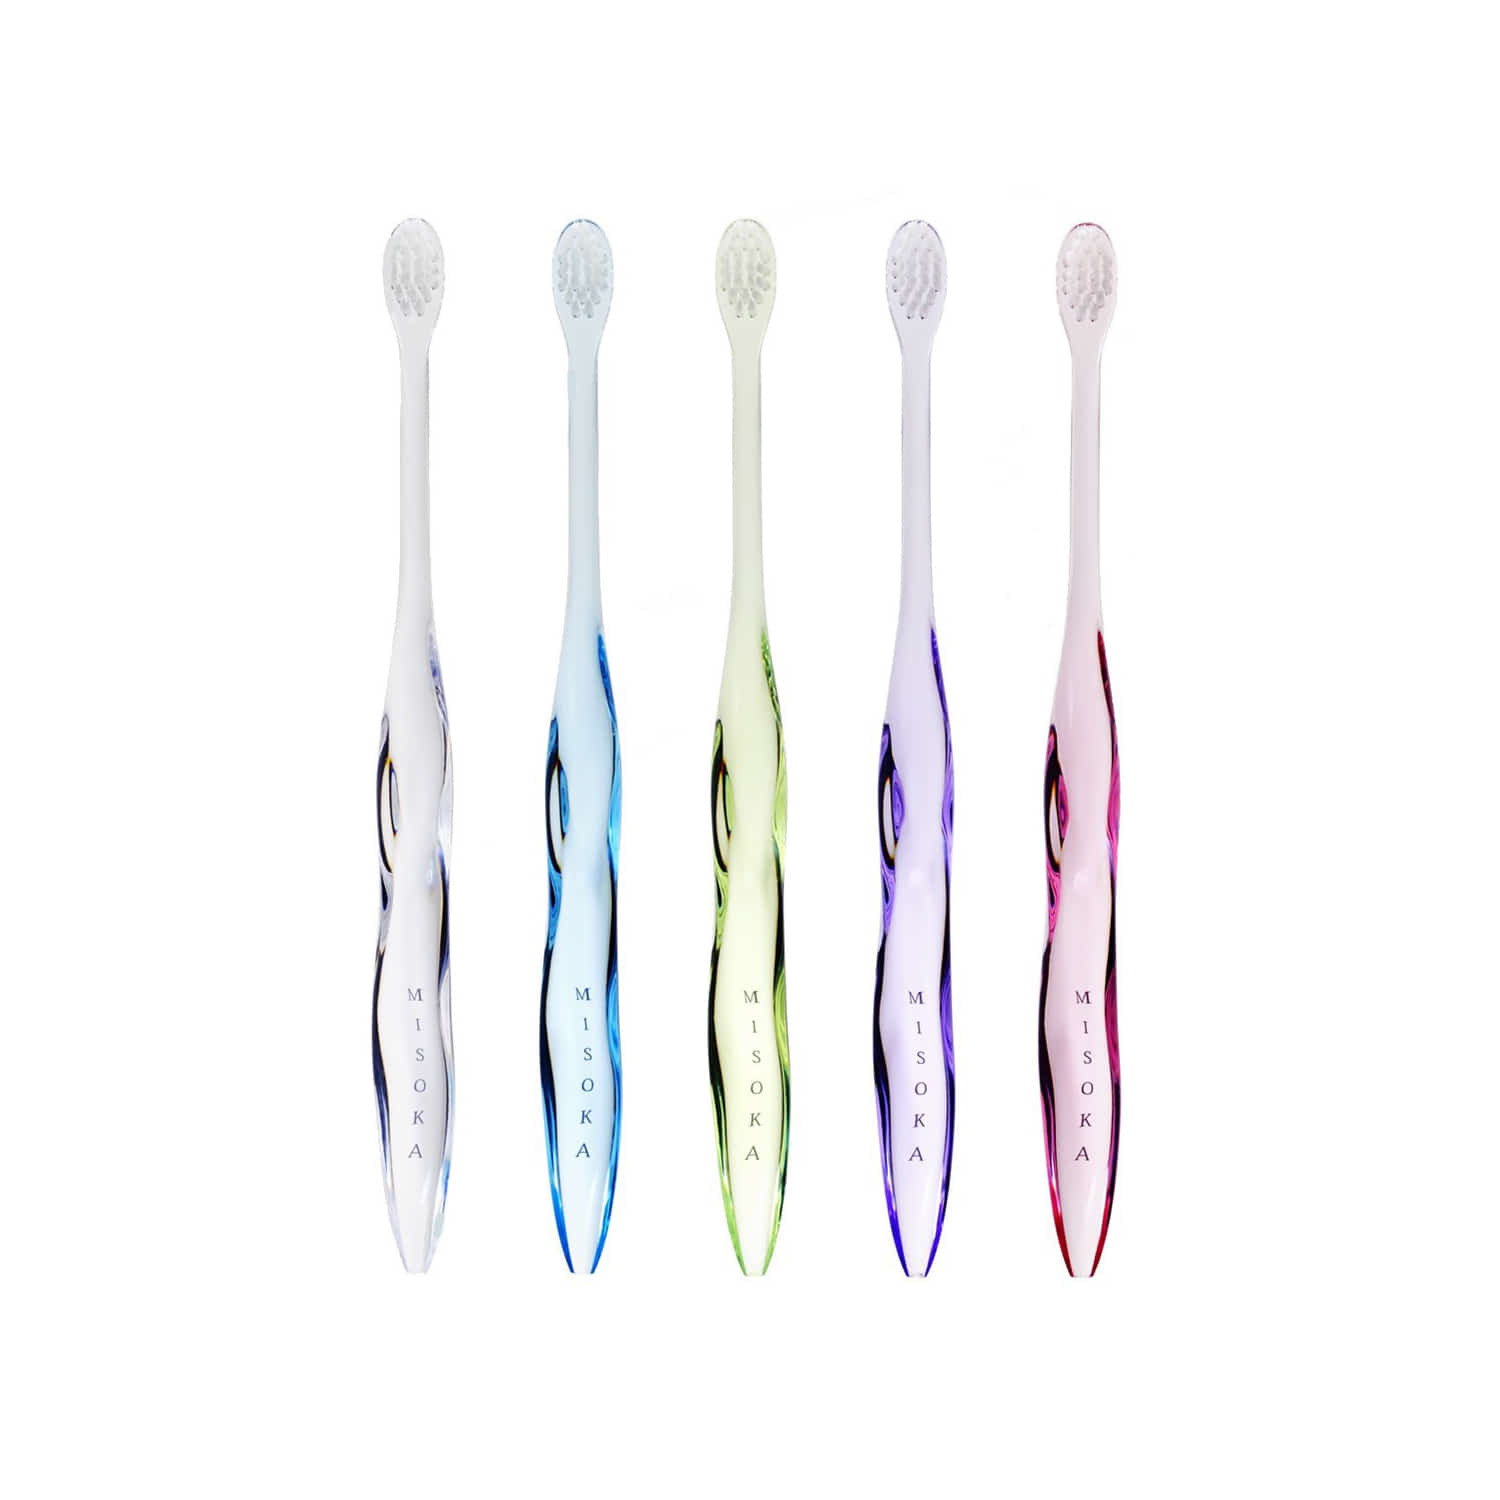 [ 2 + 1 ] Ism toothbrush, 5colors